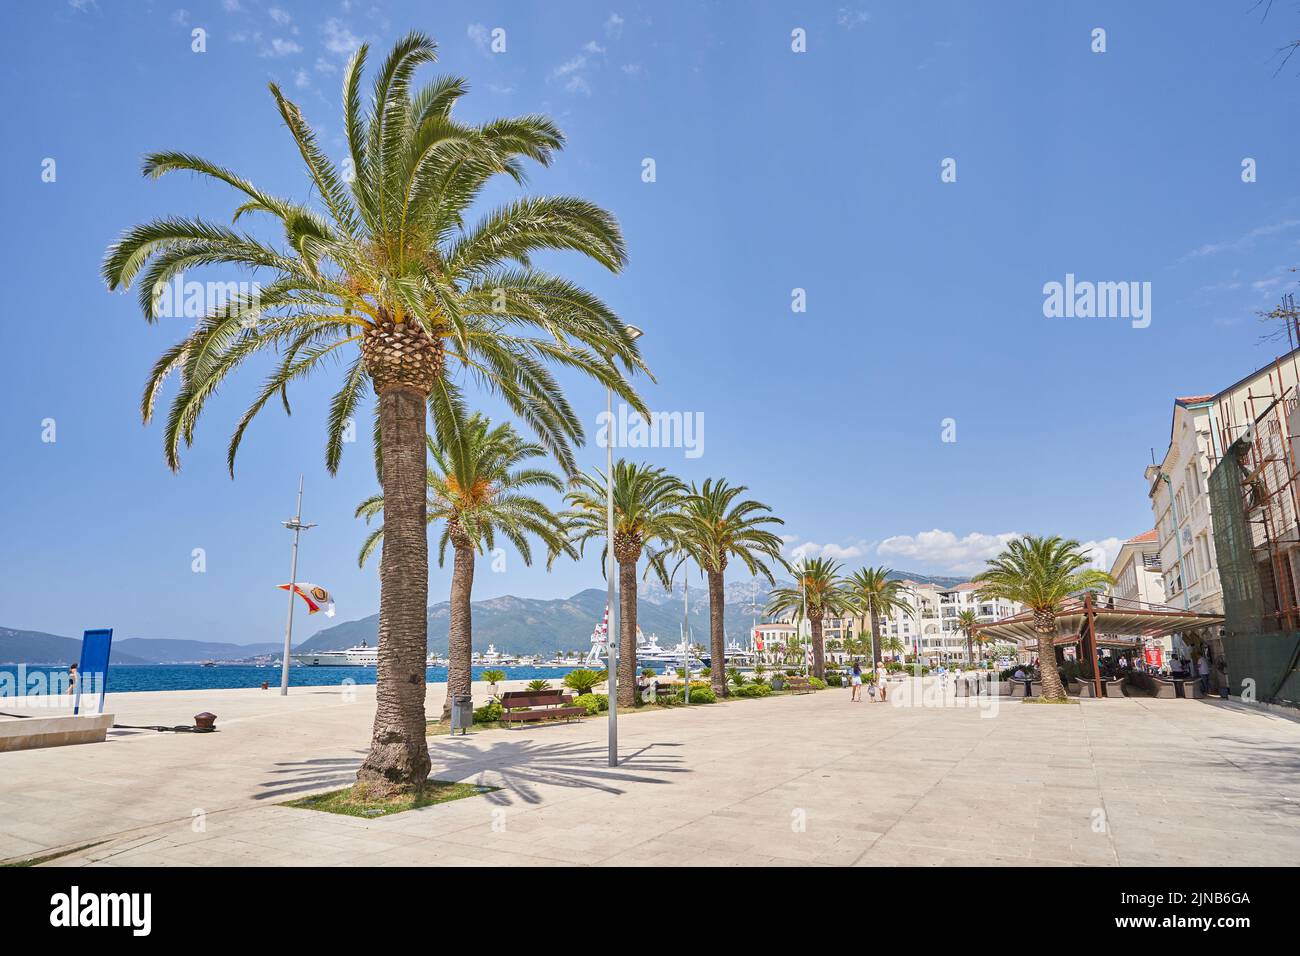 Promenade of Pine and palm trees in sunny day Stock Photo